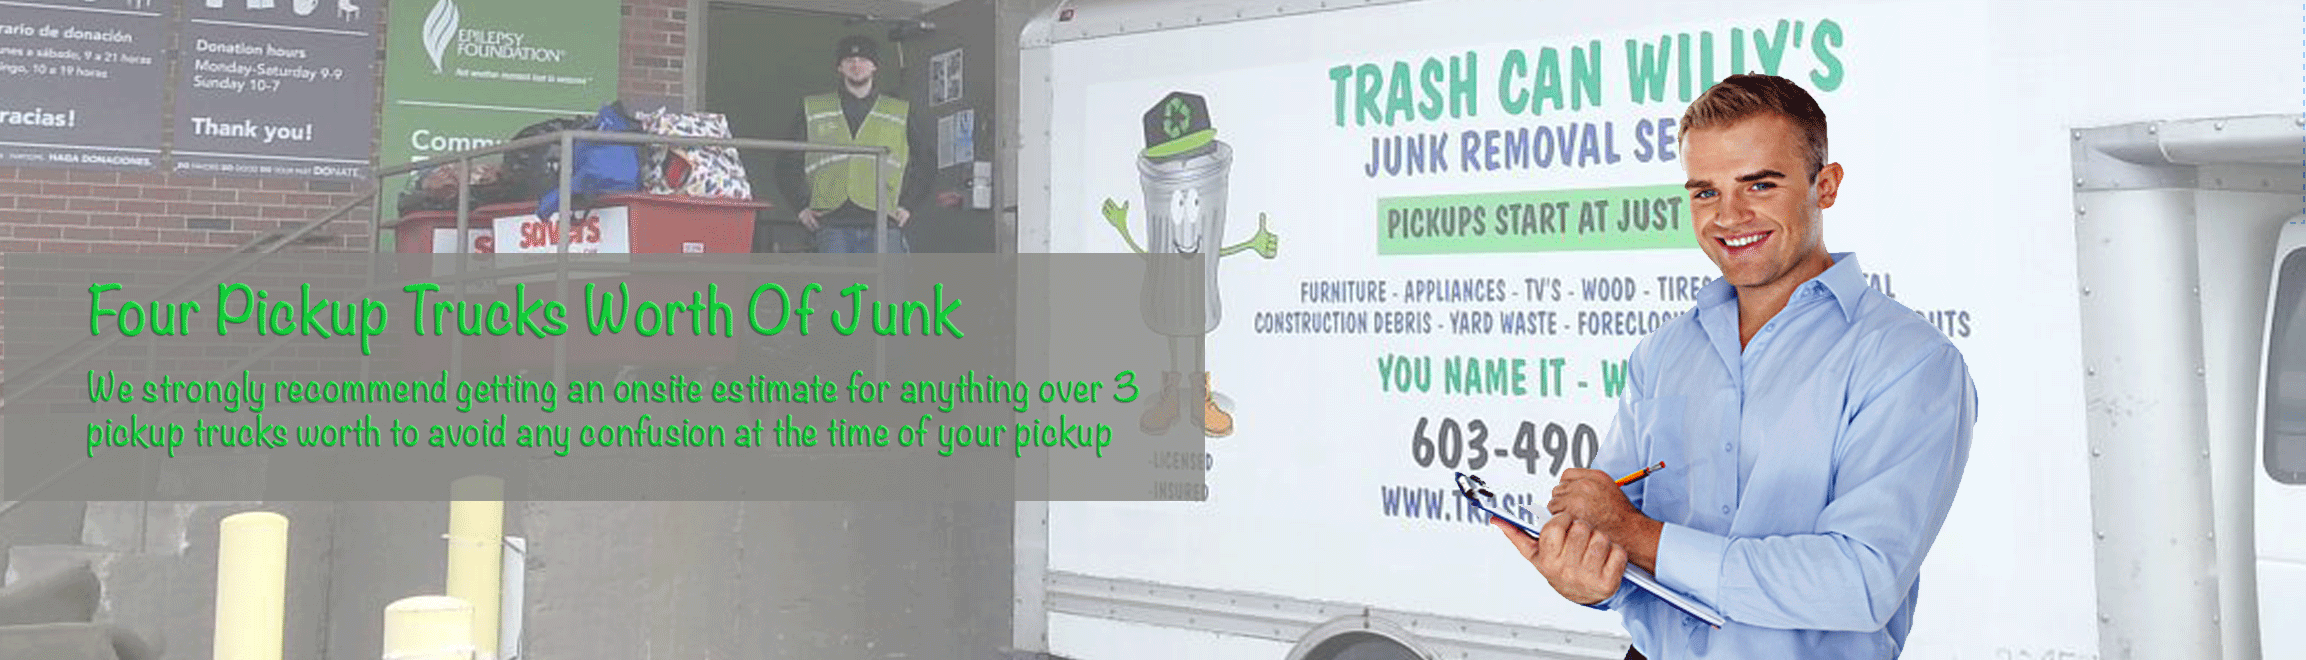 junk removal pricing on 4 or more junk removal pickup trucks worth